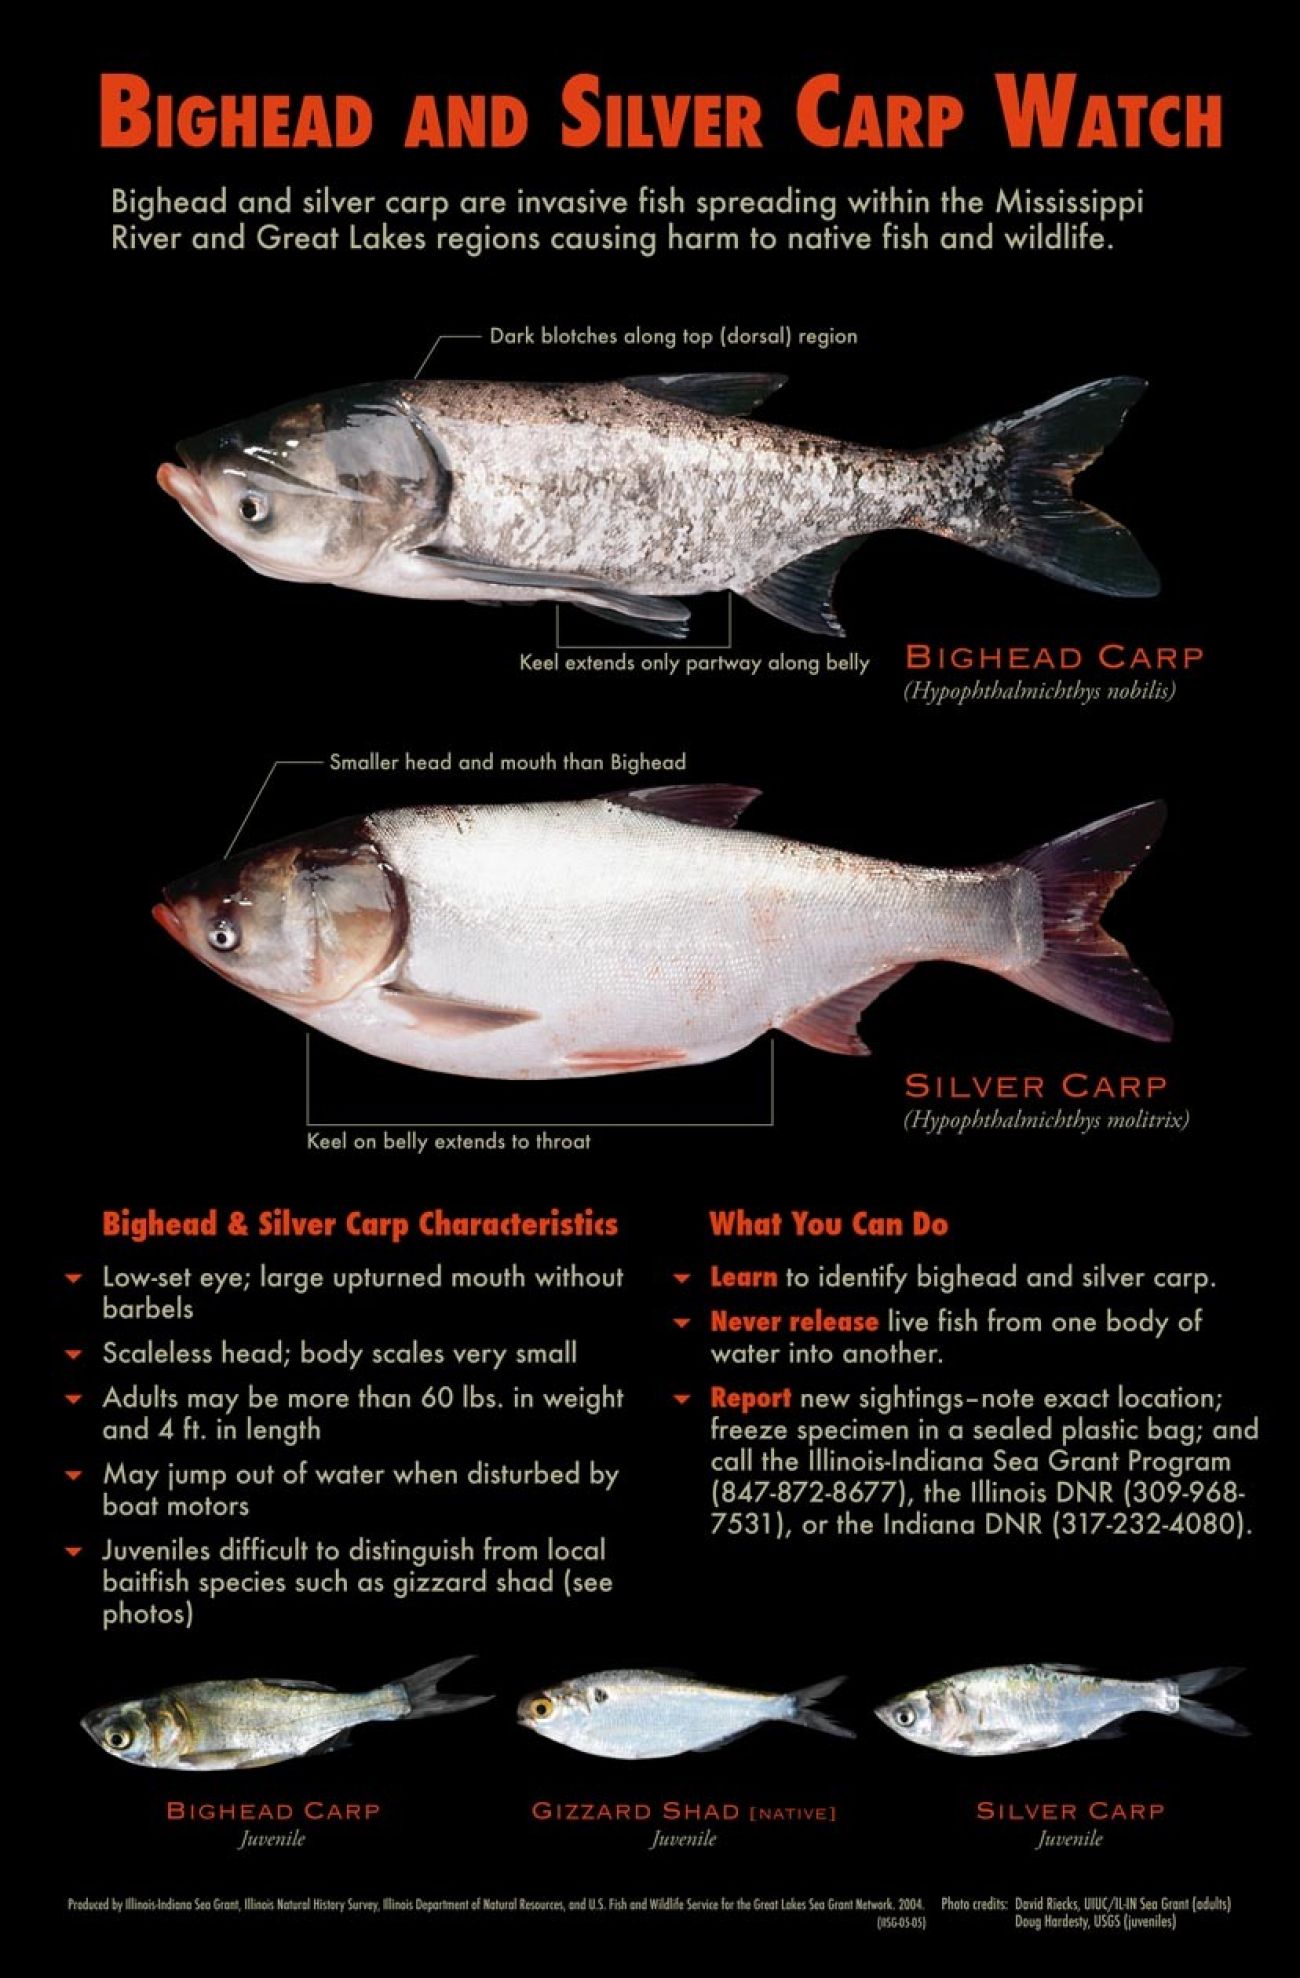 Asian carp, from mouth to tail